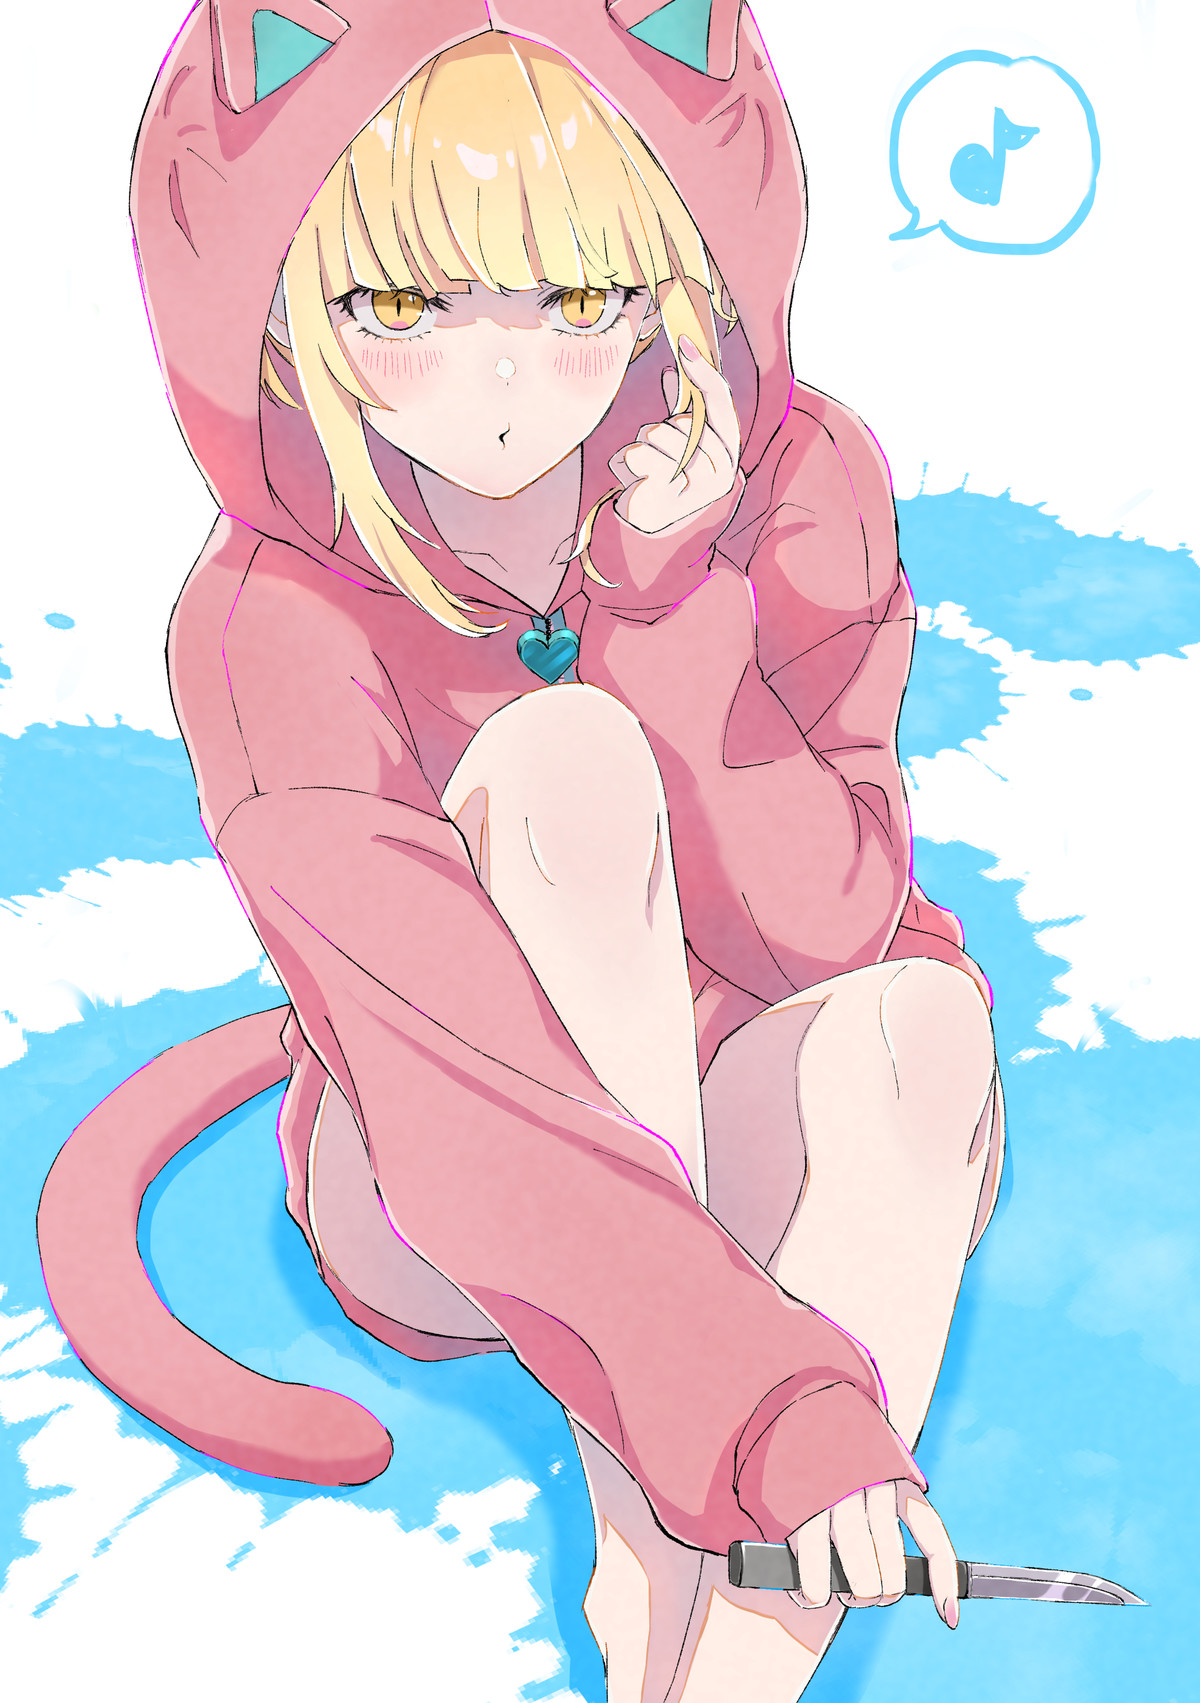 Daily Toga - 964: Kitty Hoodie. join list: DailyToga (477 subs)Mention History Source: .